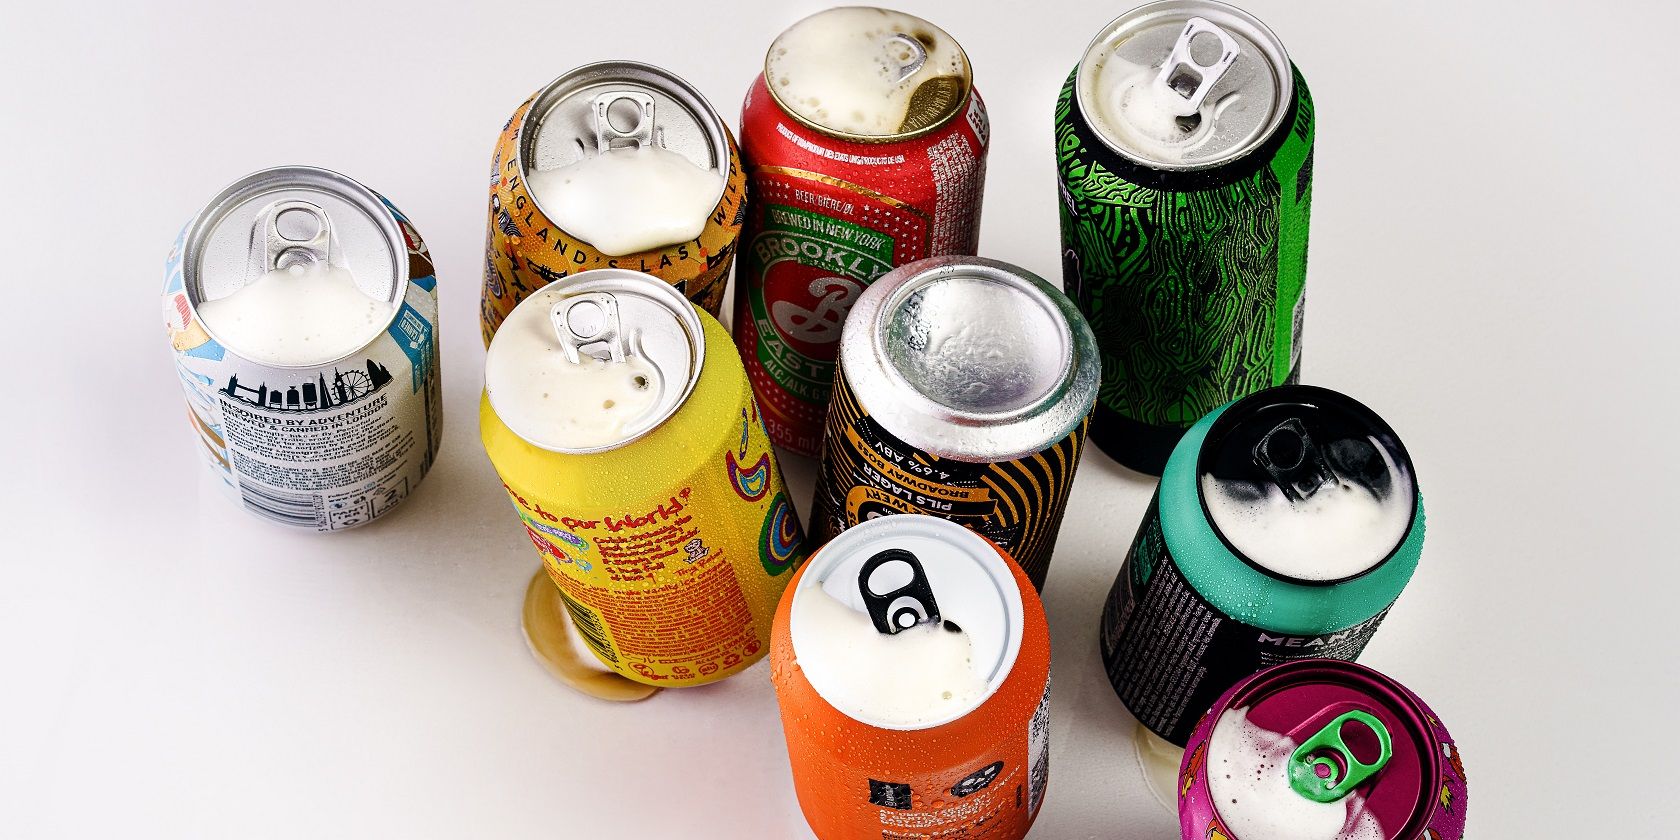 Beverage cans on a white background